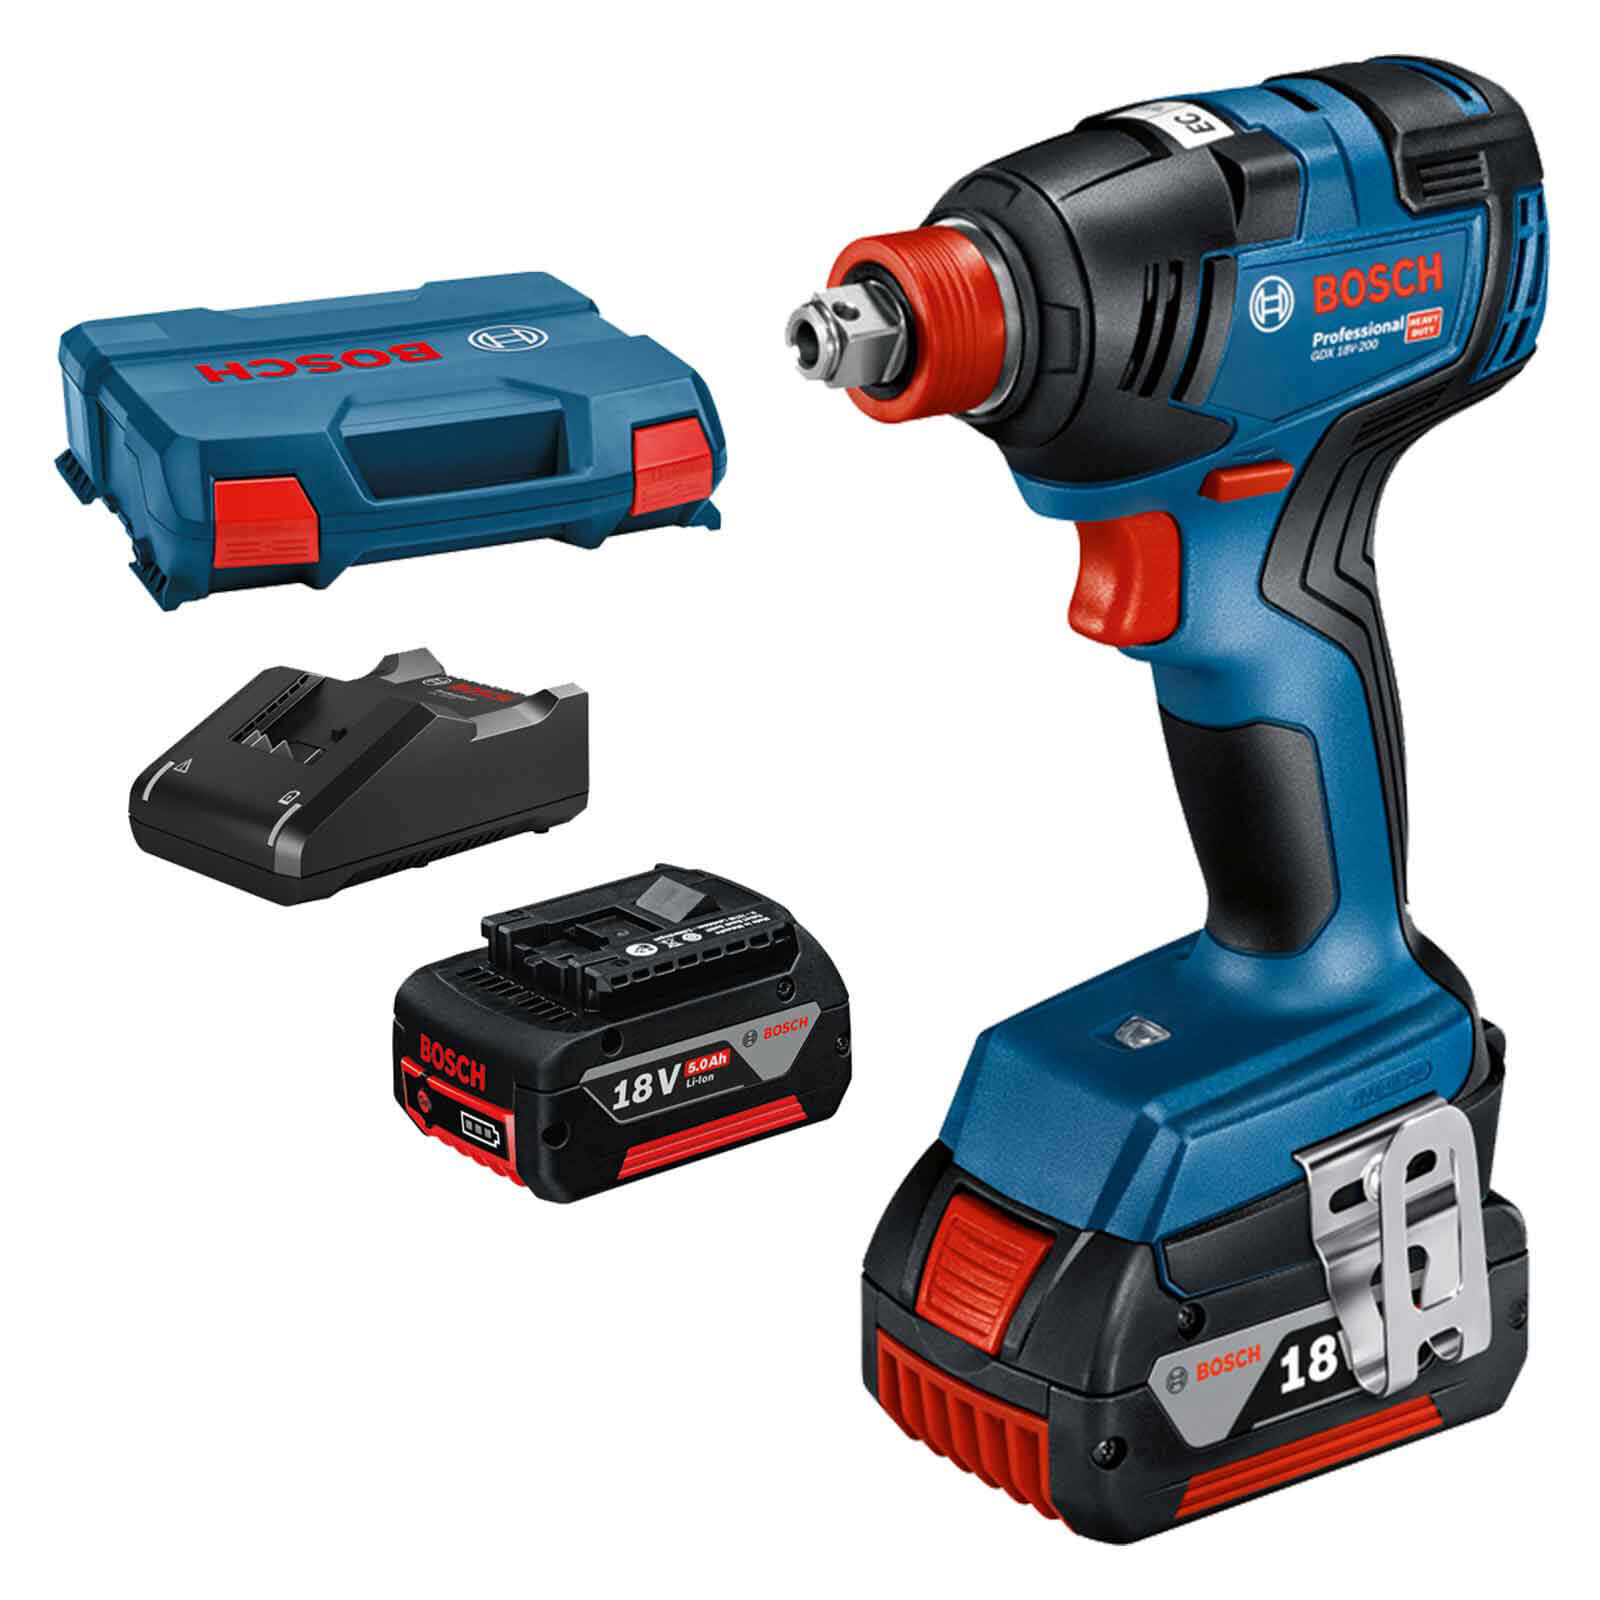 Image of Bosch GDX 18V-200 18v Cordless Brushless Impact Driver / Wrench 2 x 5ah Li-ion Charger Case